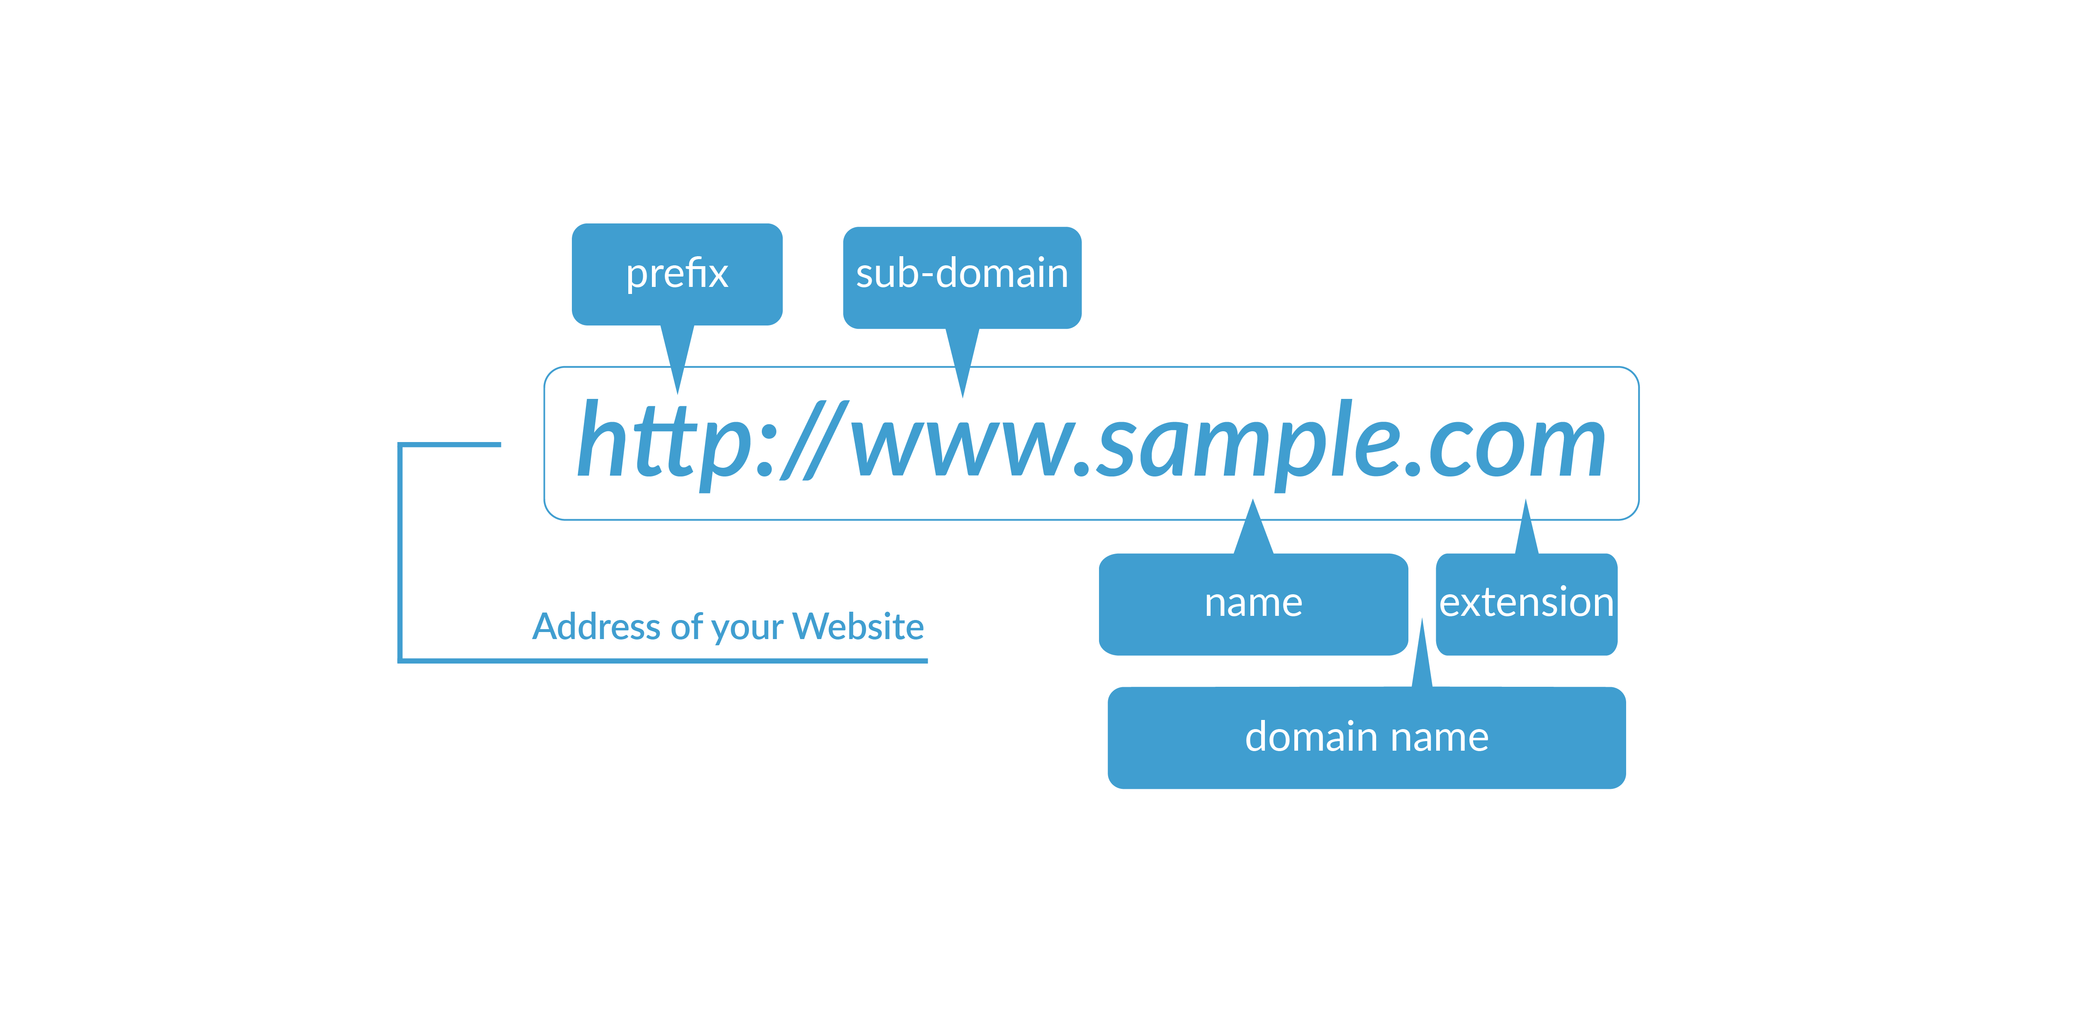 Domain Name Url Consists Two Parts